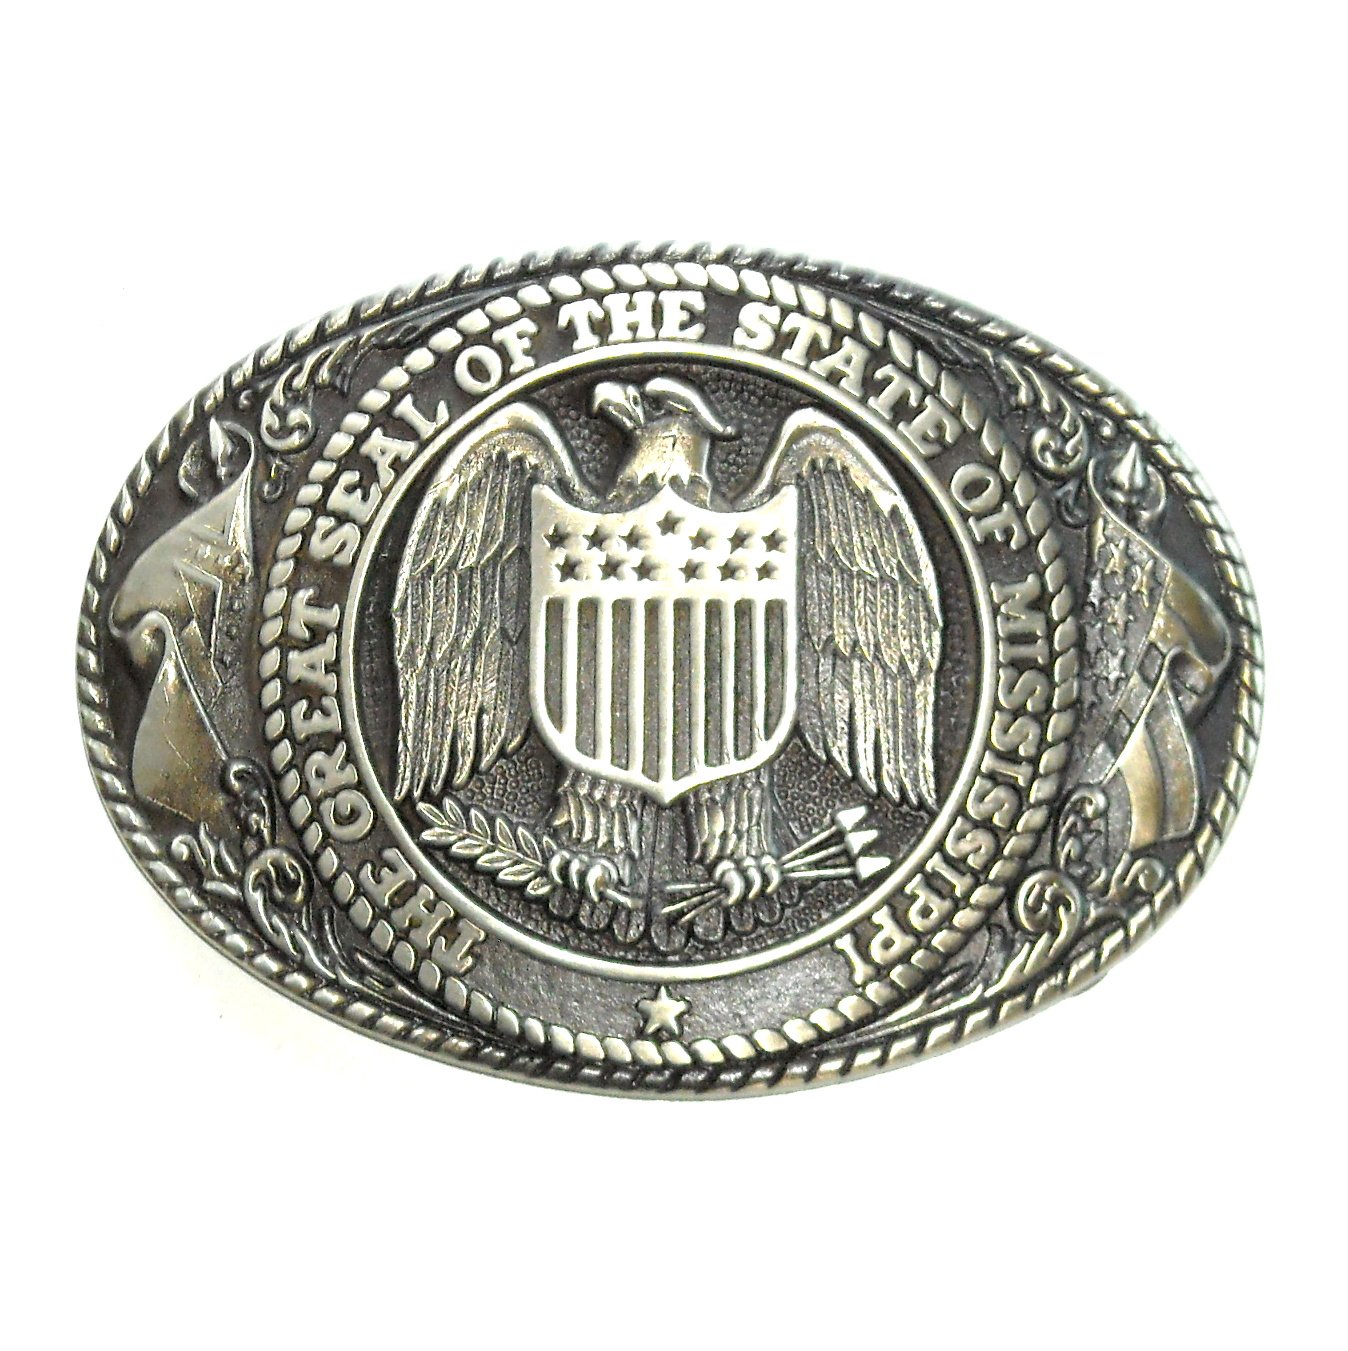 Tony Lama Mississippi State Seal First Edition Solid Brass US Belt Buckle